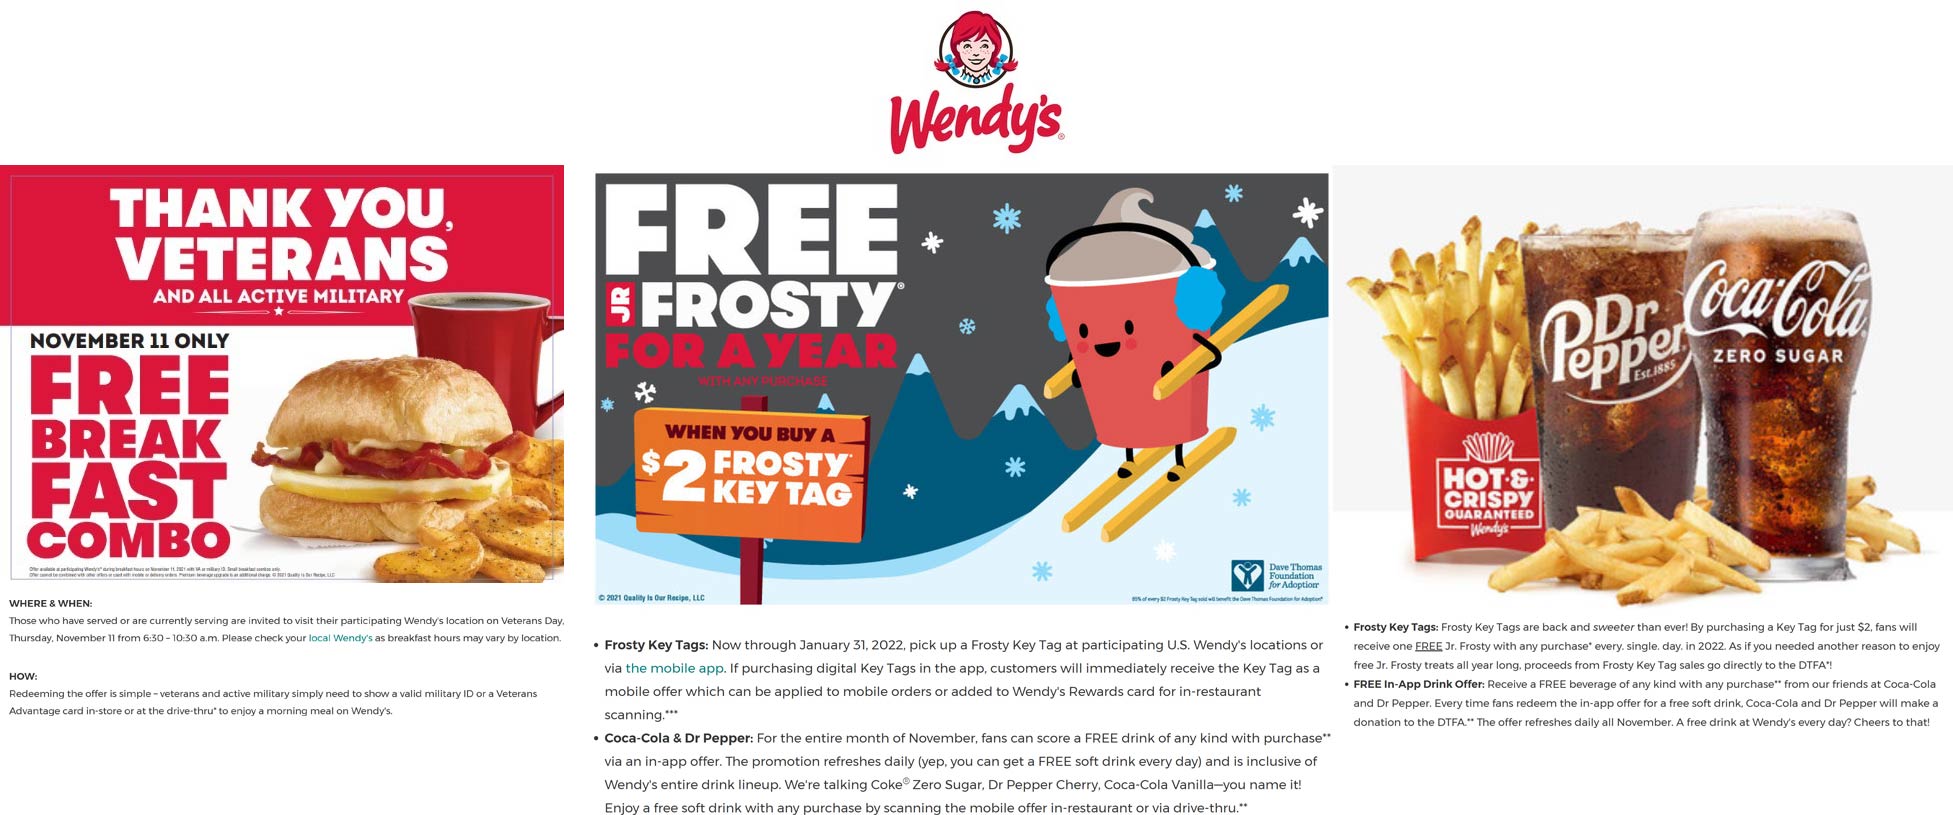 Wendys restaurants Coupon  Free drink all month, veterans breakfast free the 11th & $2 for unlimited frostys in 2022 at Wendys #wendys 